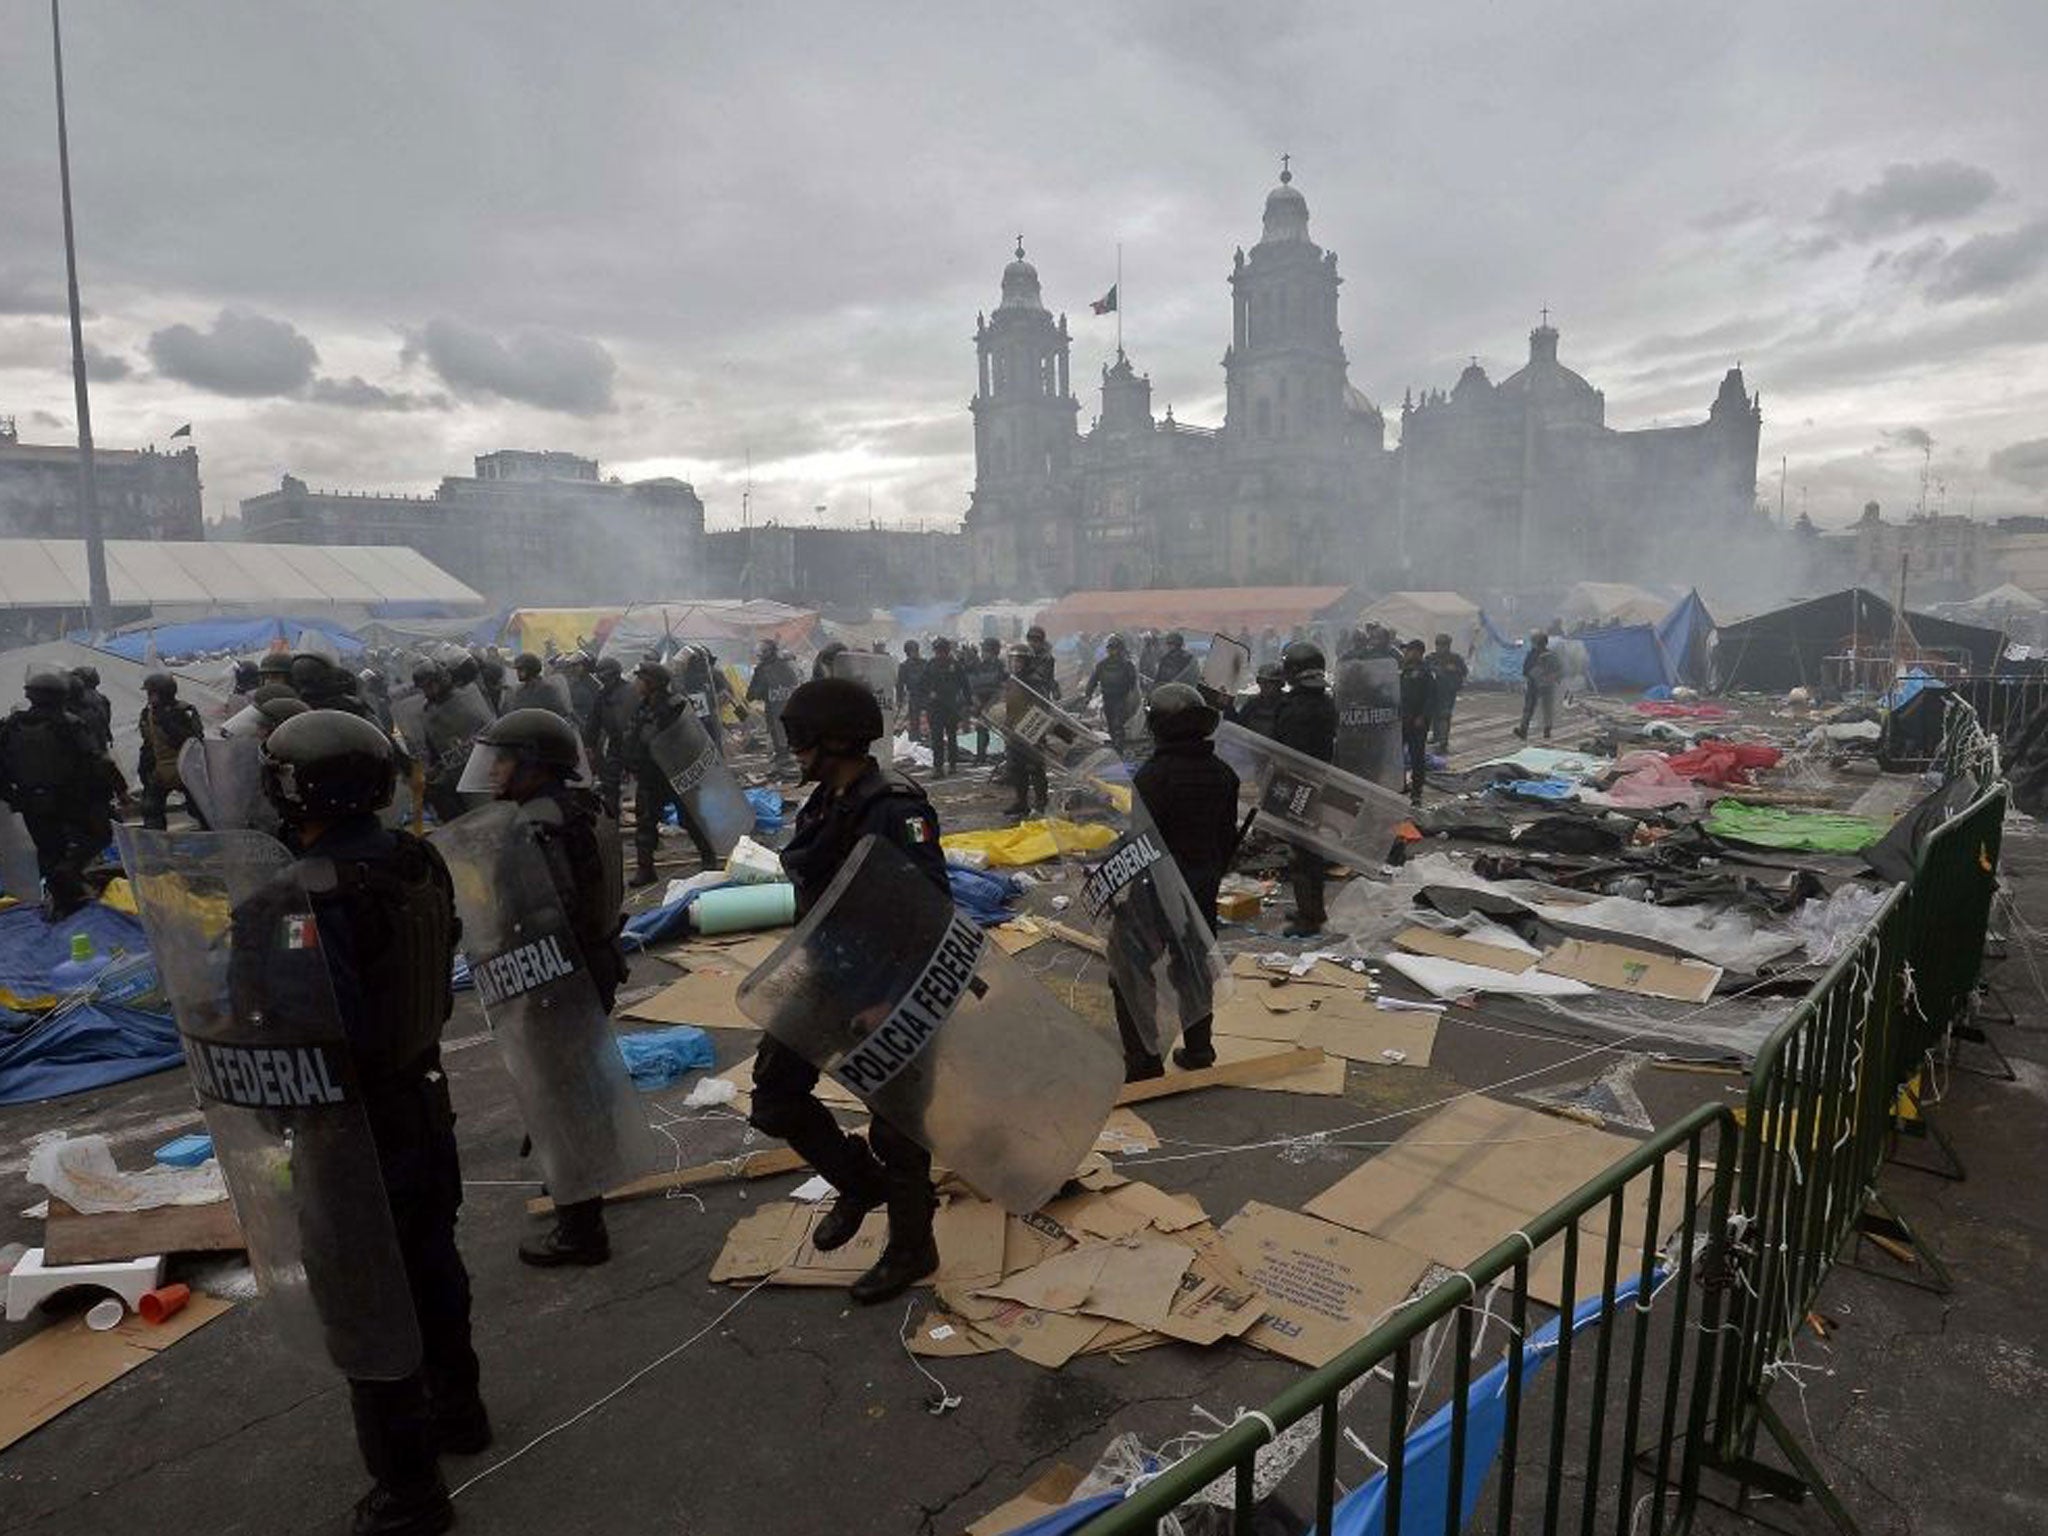 Mexican Federal Police are pictured in the surroundings of Mexico City's Zocalo square during clashes with teachers protesting against an education reform on 13 September as clashes continued today